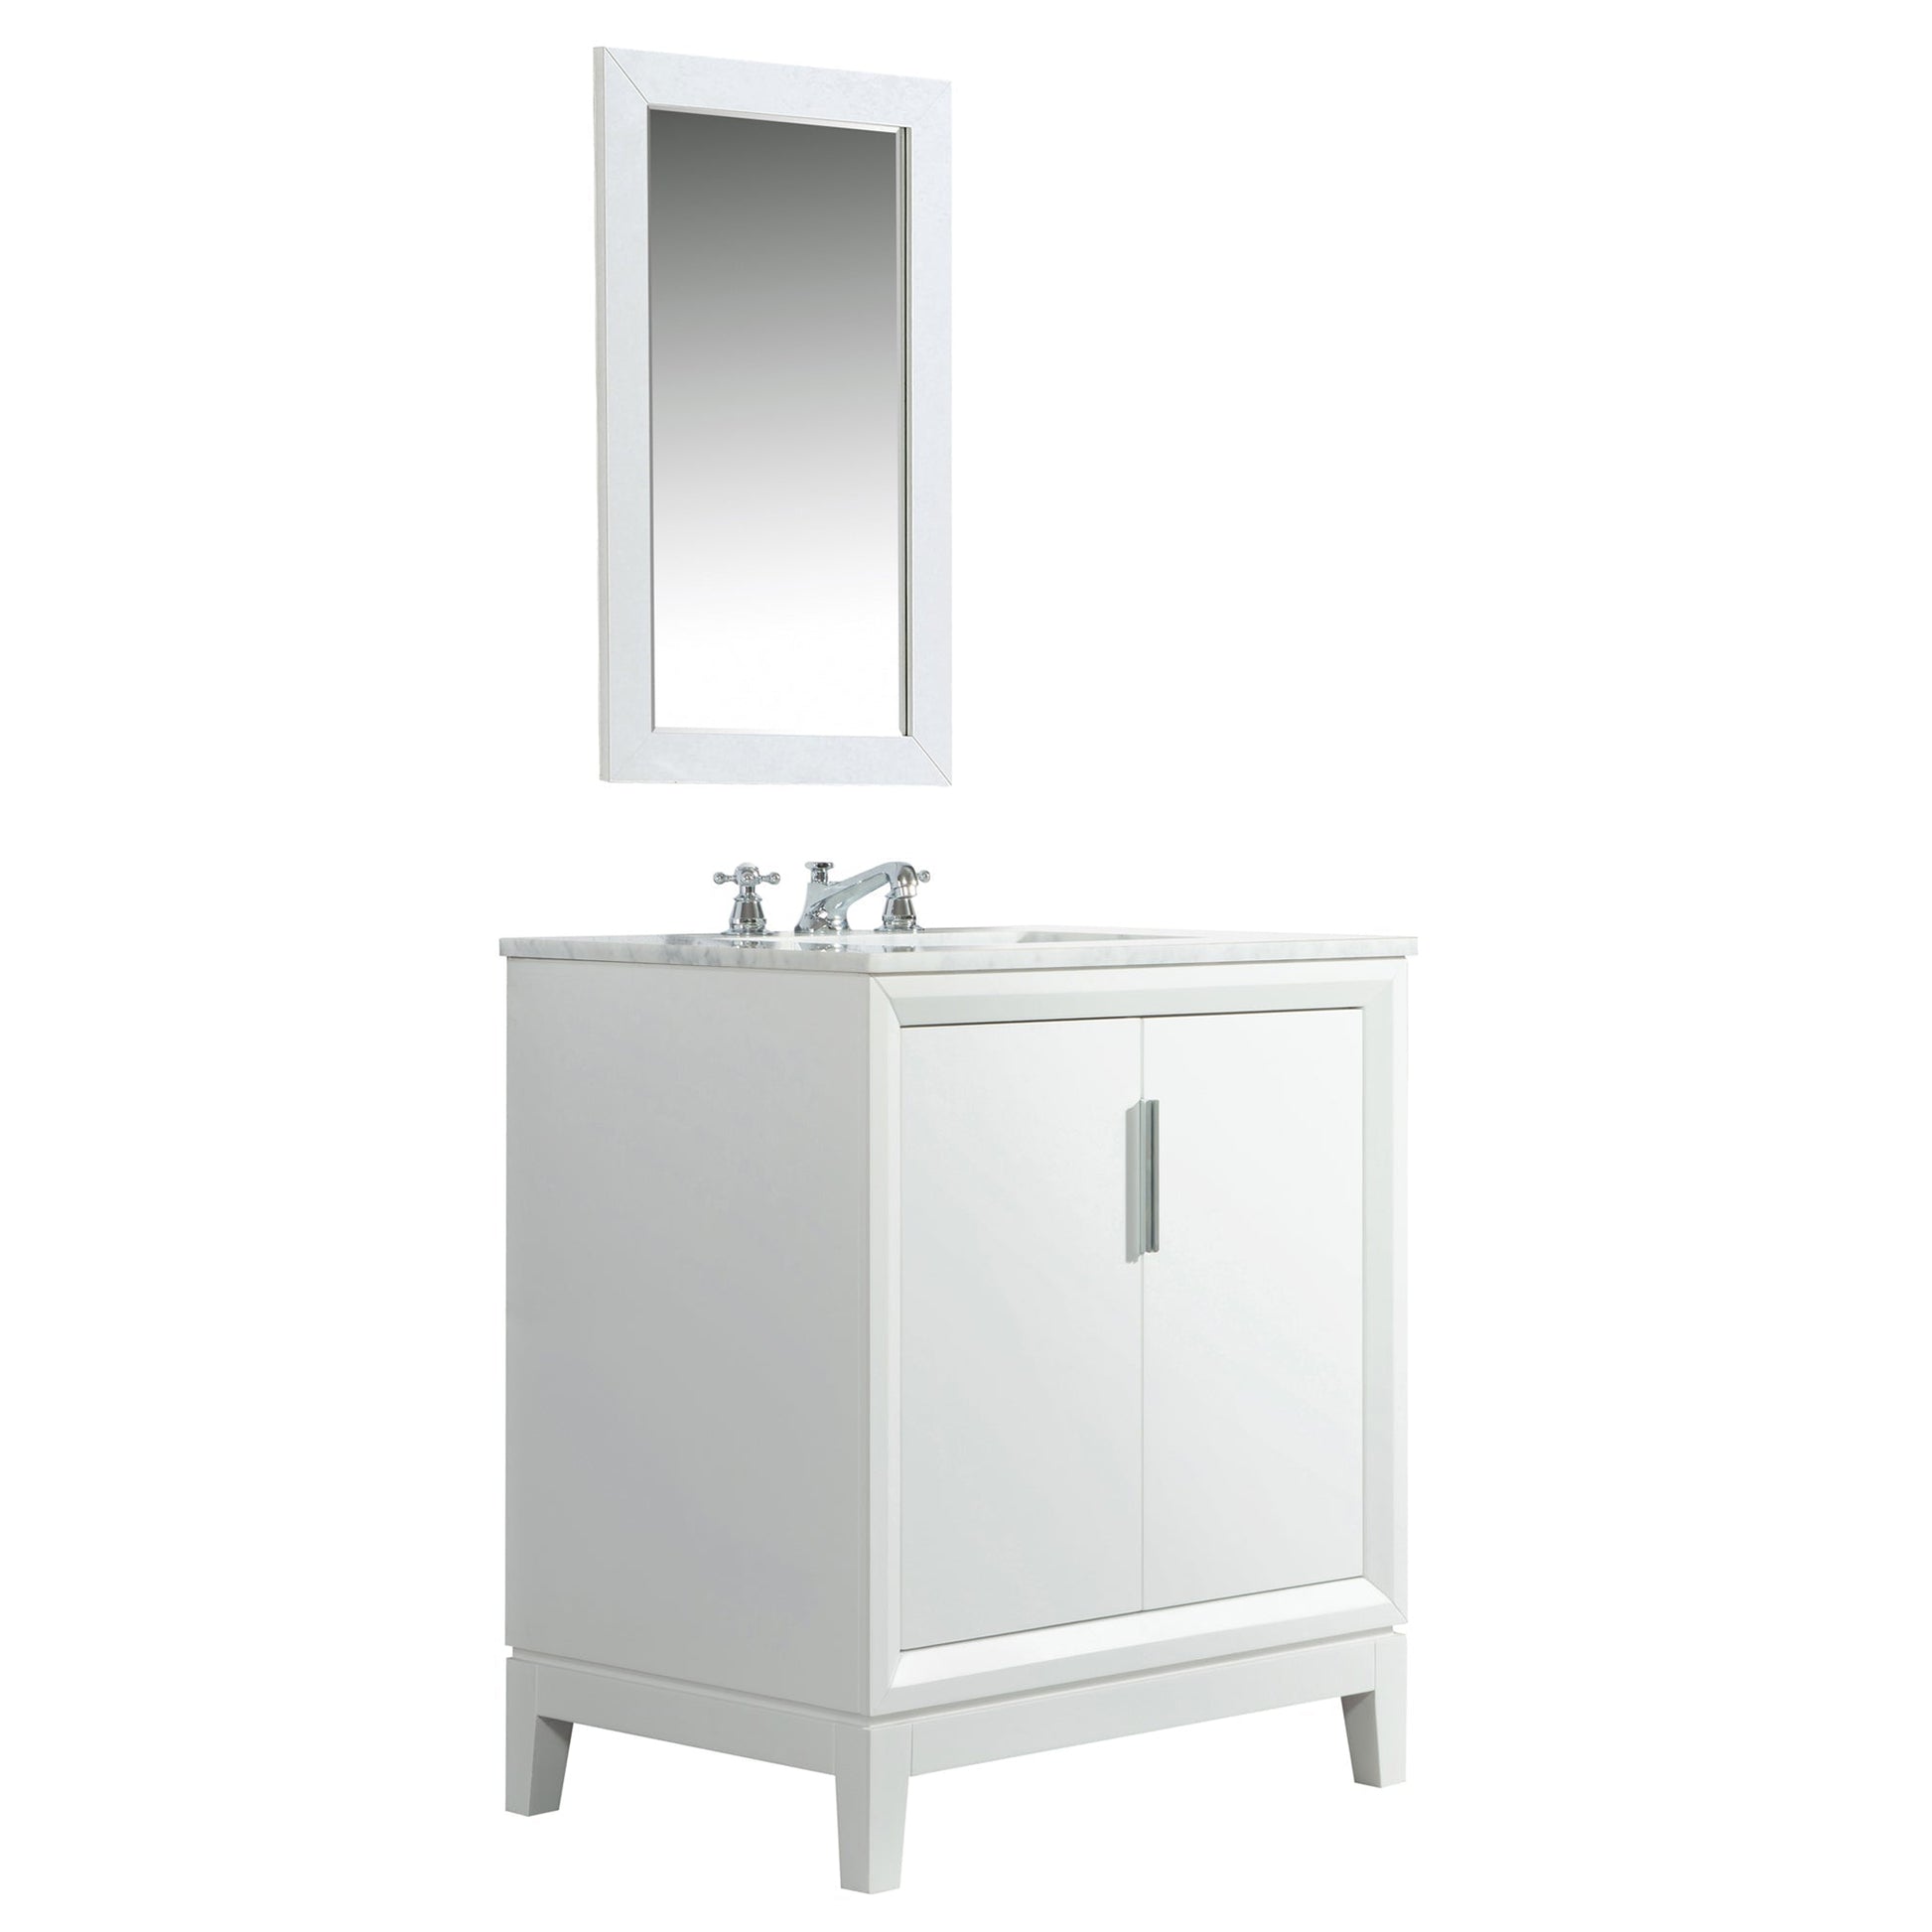 Water Creation Elizabeth 30" Single Sink Carrara White Marble Vanity In Pure White With Matching Mirror